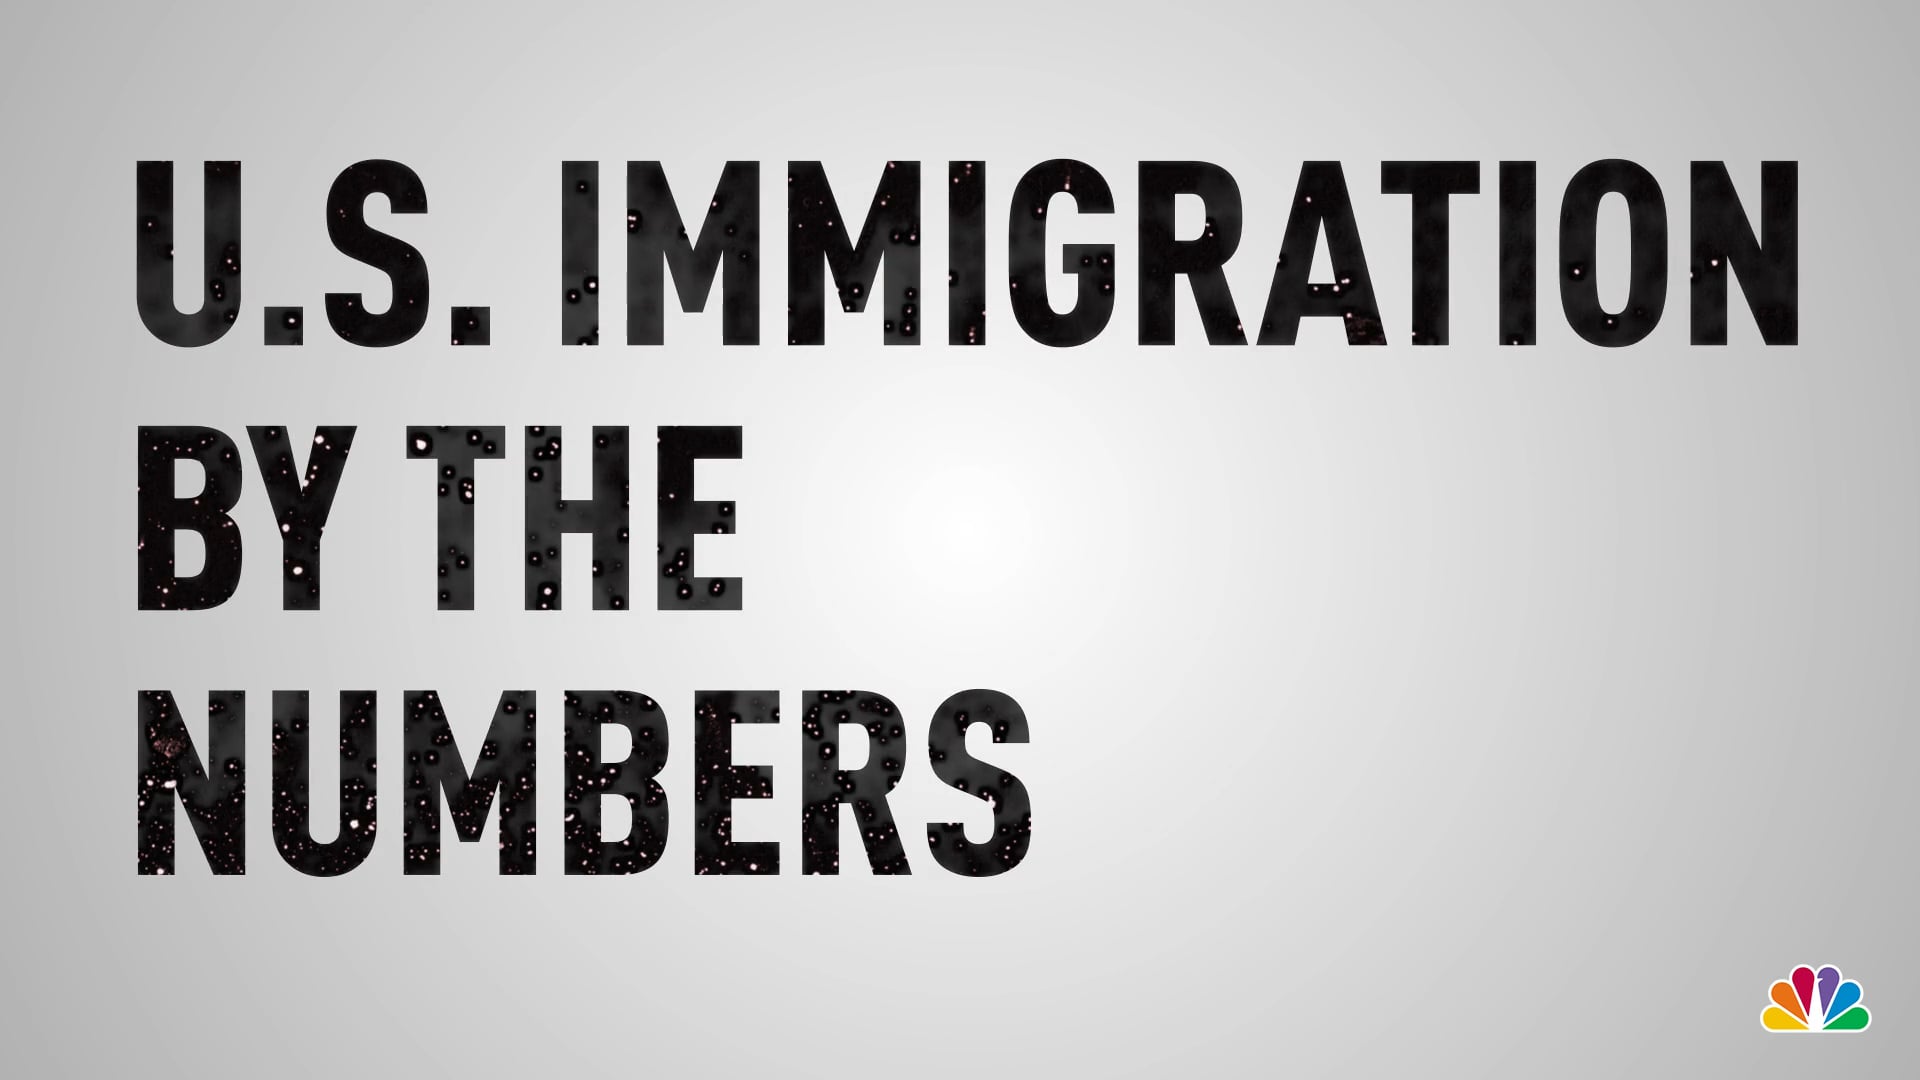 NBC NEWS - IMMIGRATION BY THE NUMBERS